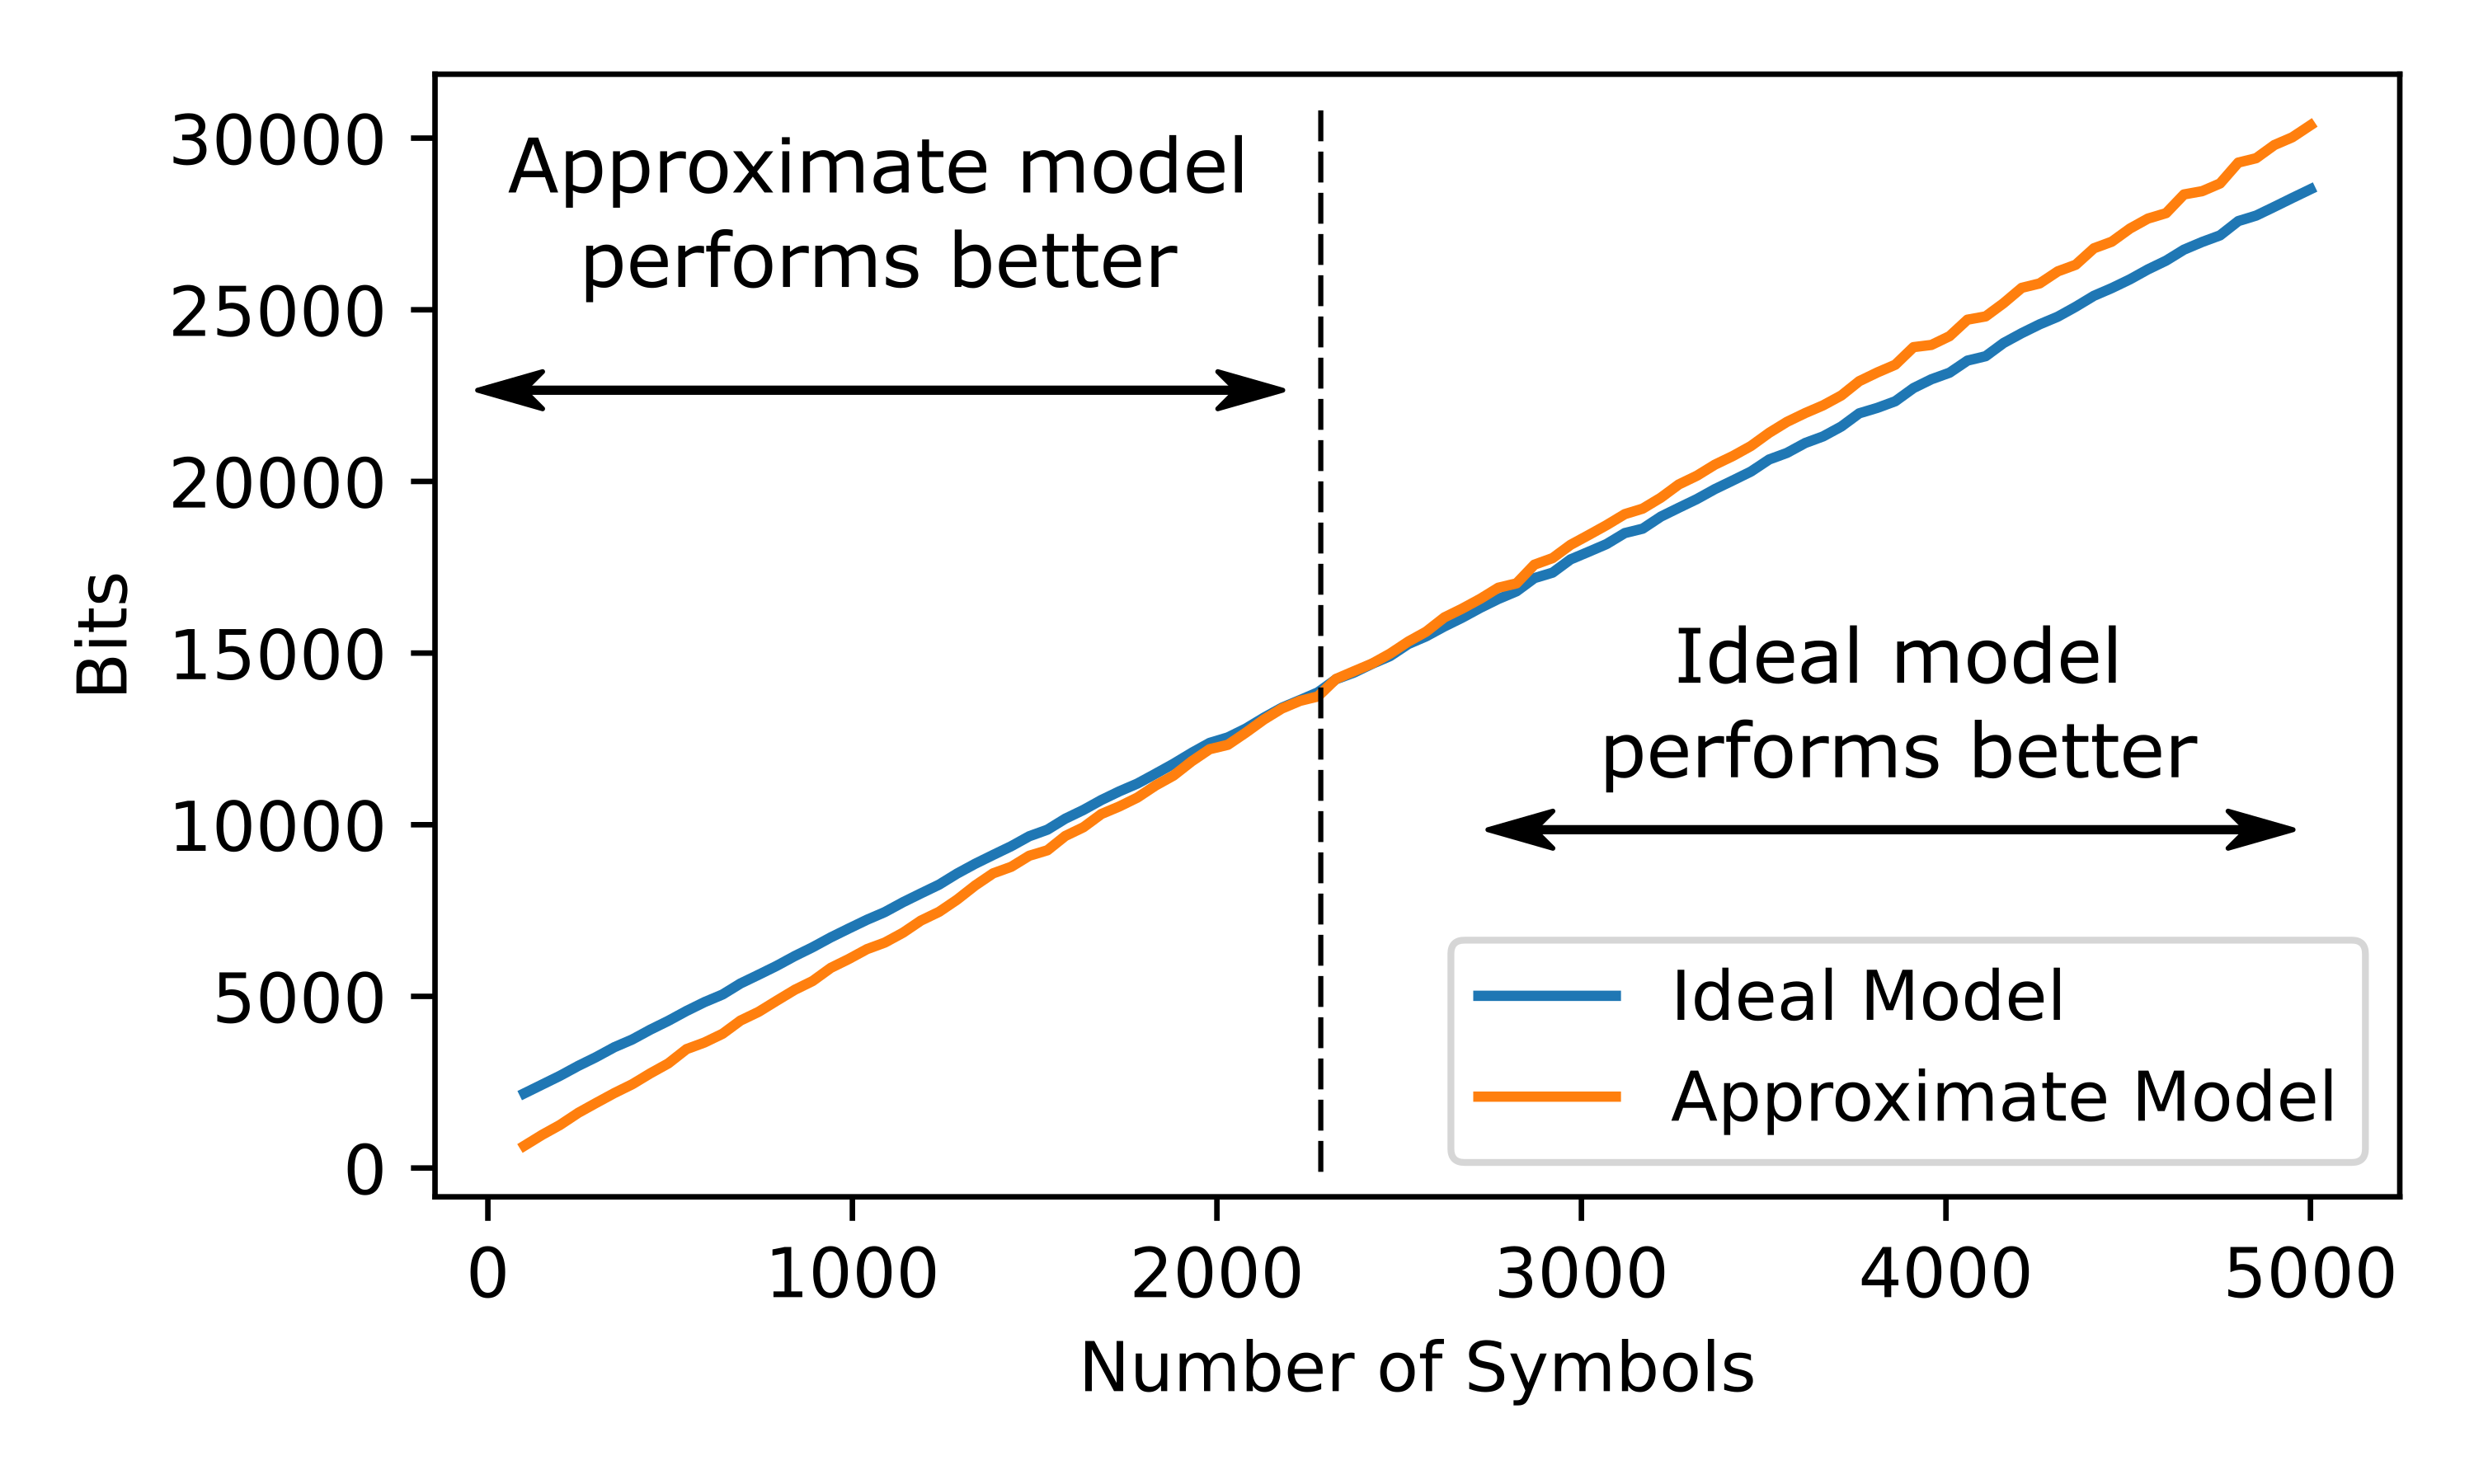 Ideal vs Approximate model